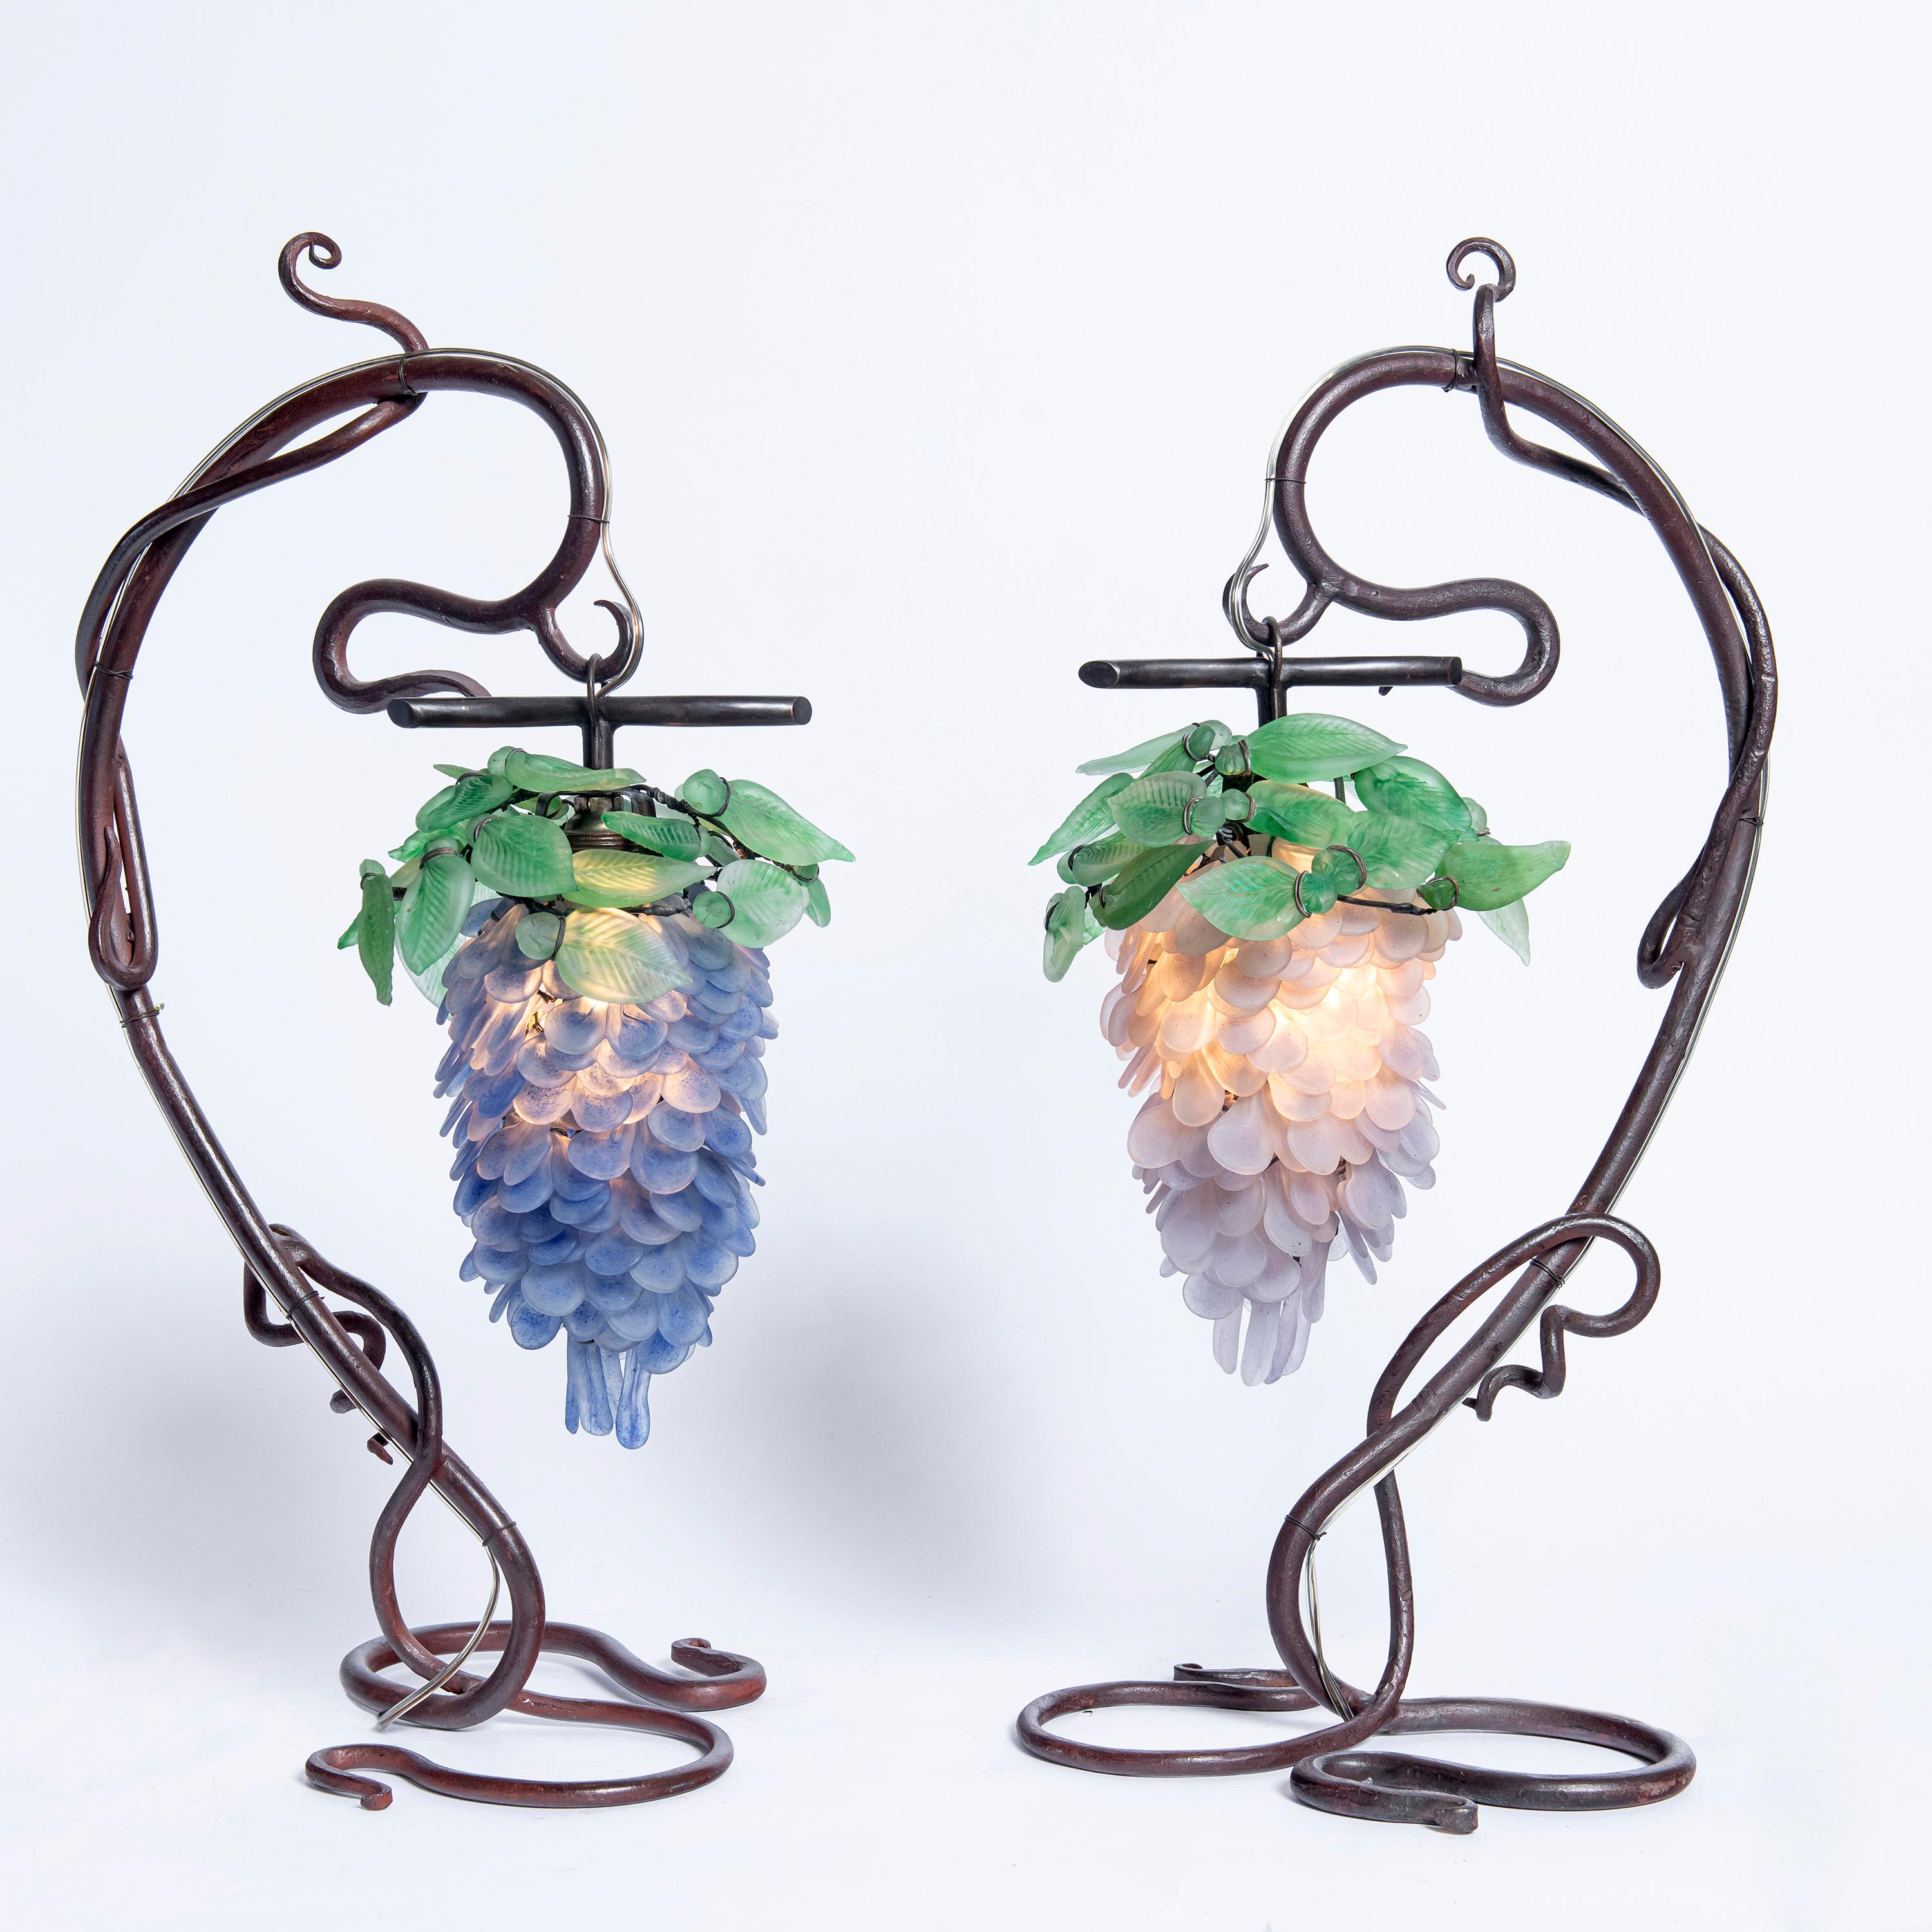 Pair of iron and Venetian glass table lamps, Italy, circa 1900.